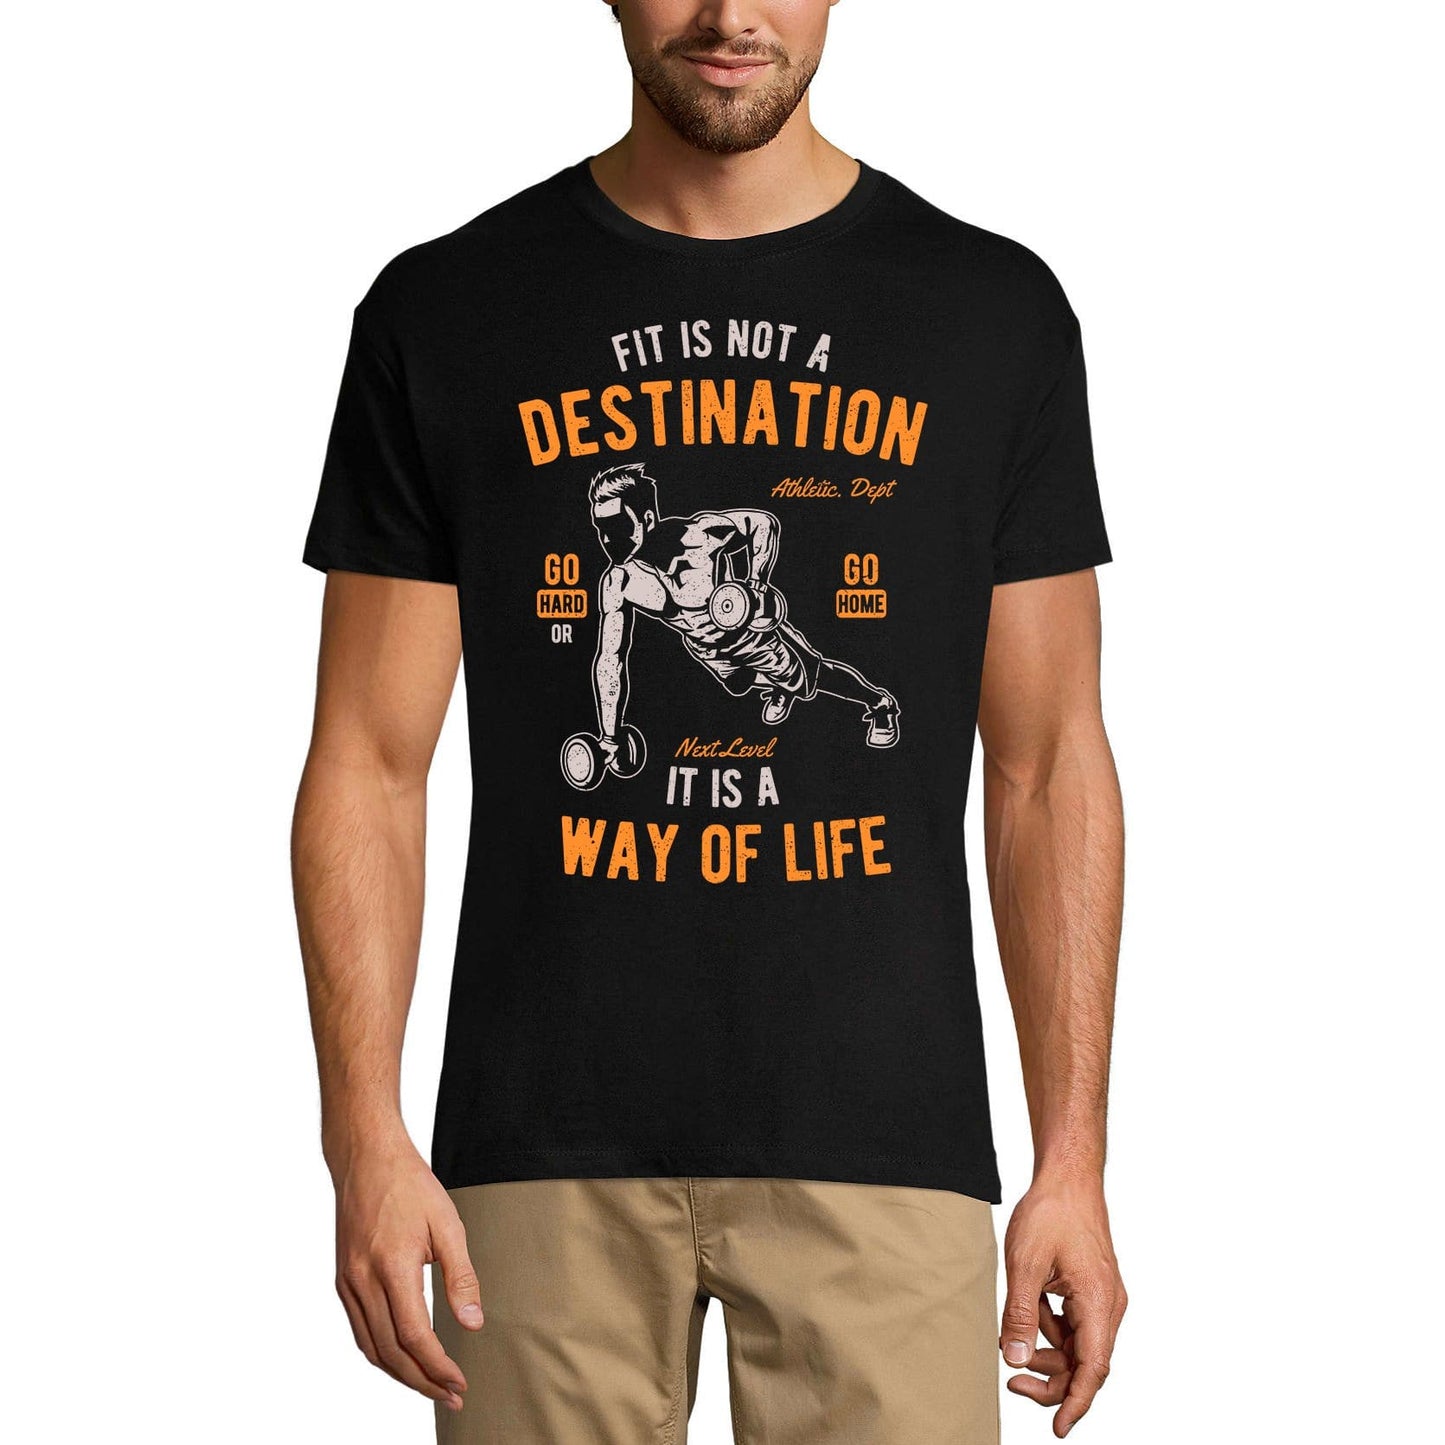 ULTRABASIC Men's T-Shirt Fit Is Not a Destination It Is a Way of Life - Go Hard or Go Home - Gym Motivational Tee Shirt